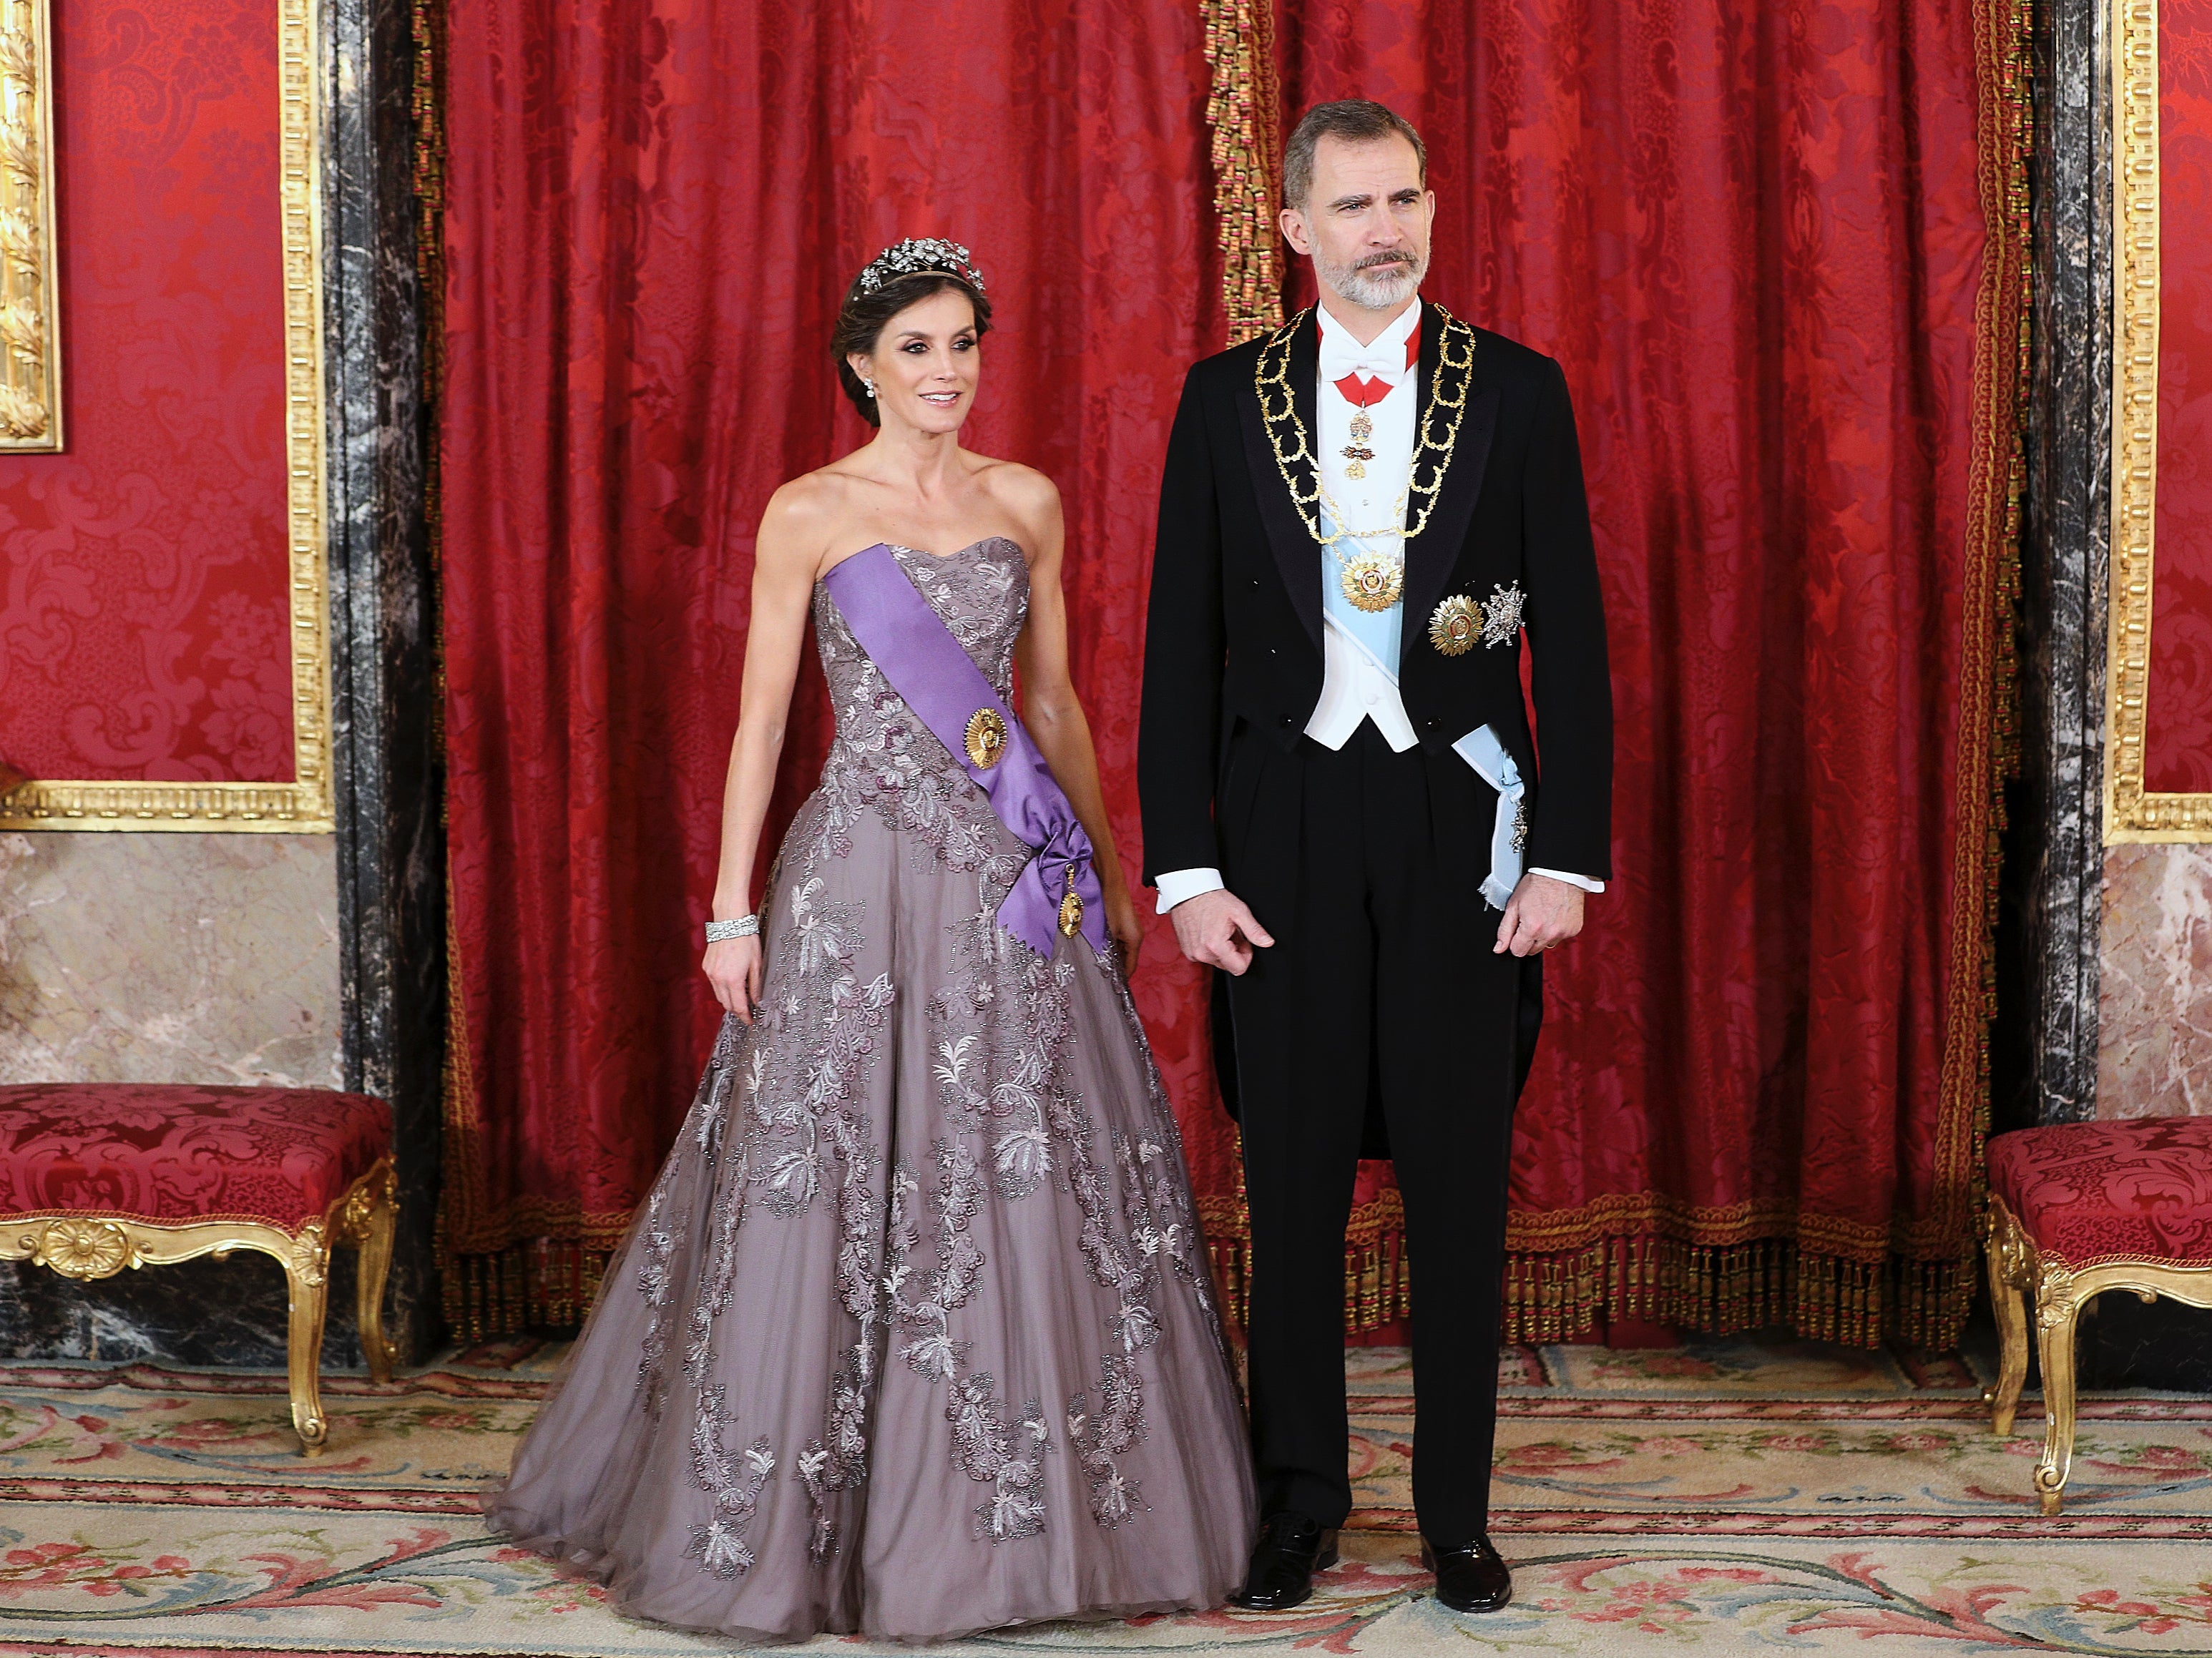 Queen Letizia and King Felipe attend a dinner at Royal Palace in Madrid on 27 February 2019